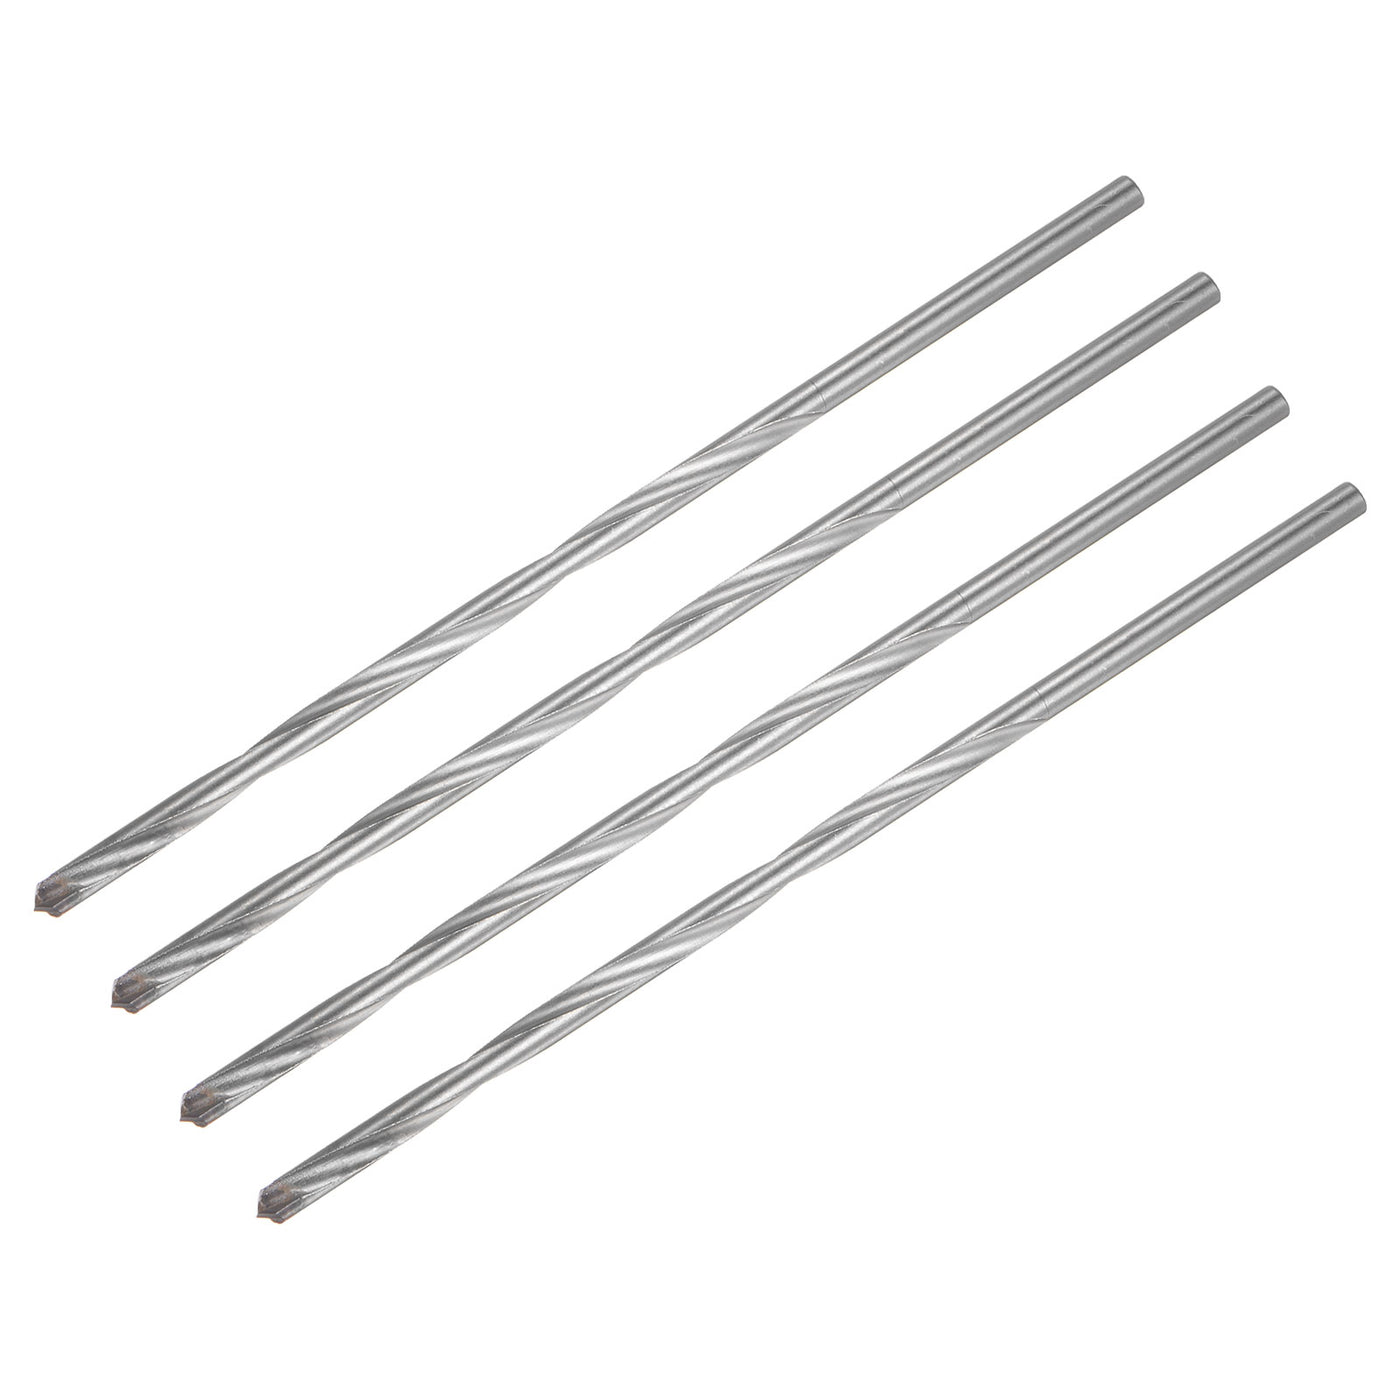 uxcell Uxcell 6mm Cutting Dia Round Shank Cemented Carbide Twist Drill Bit, 200mm Length 4 Pcs